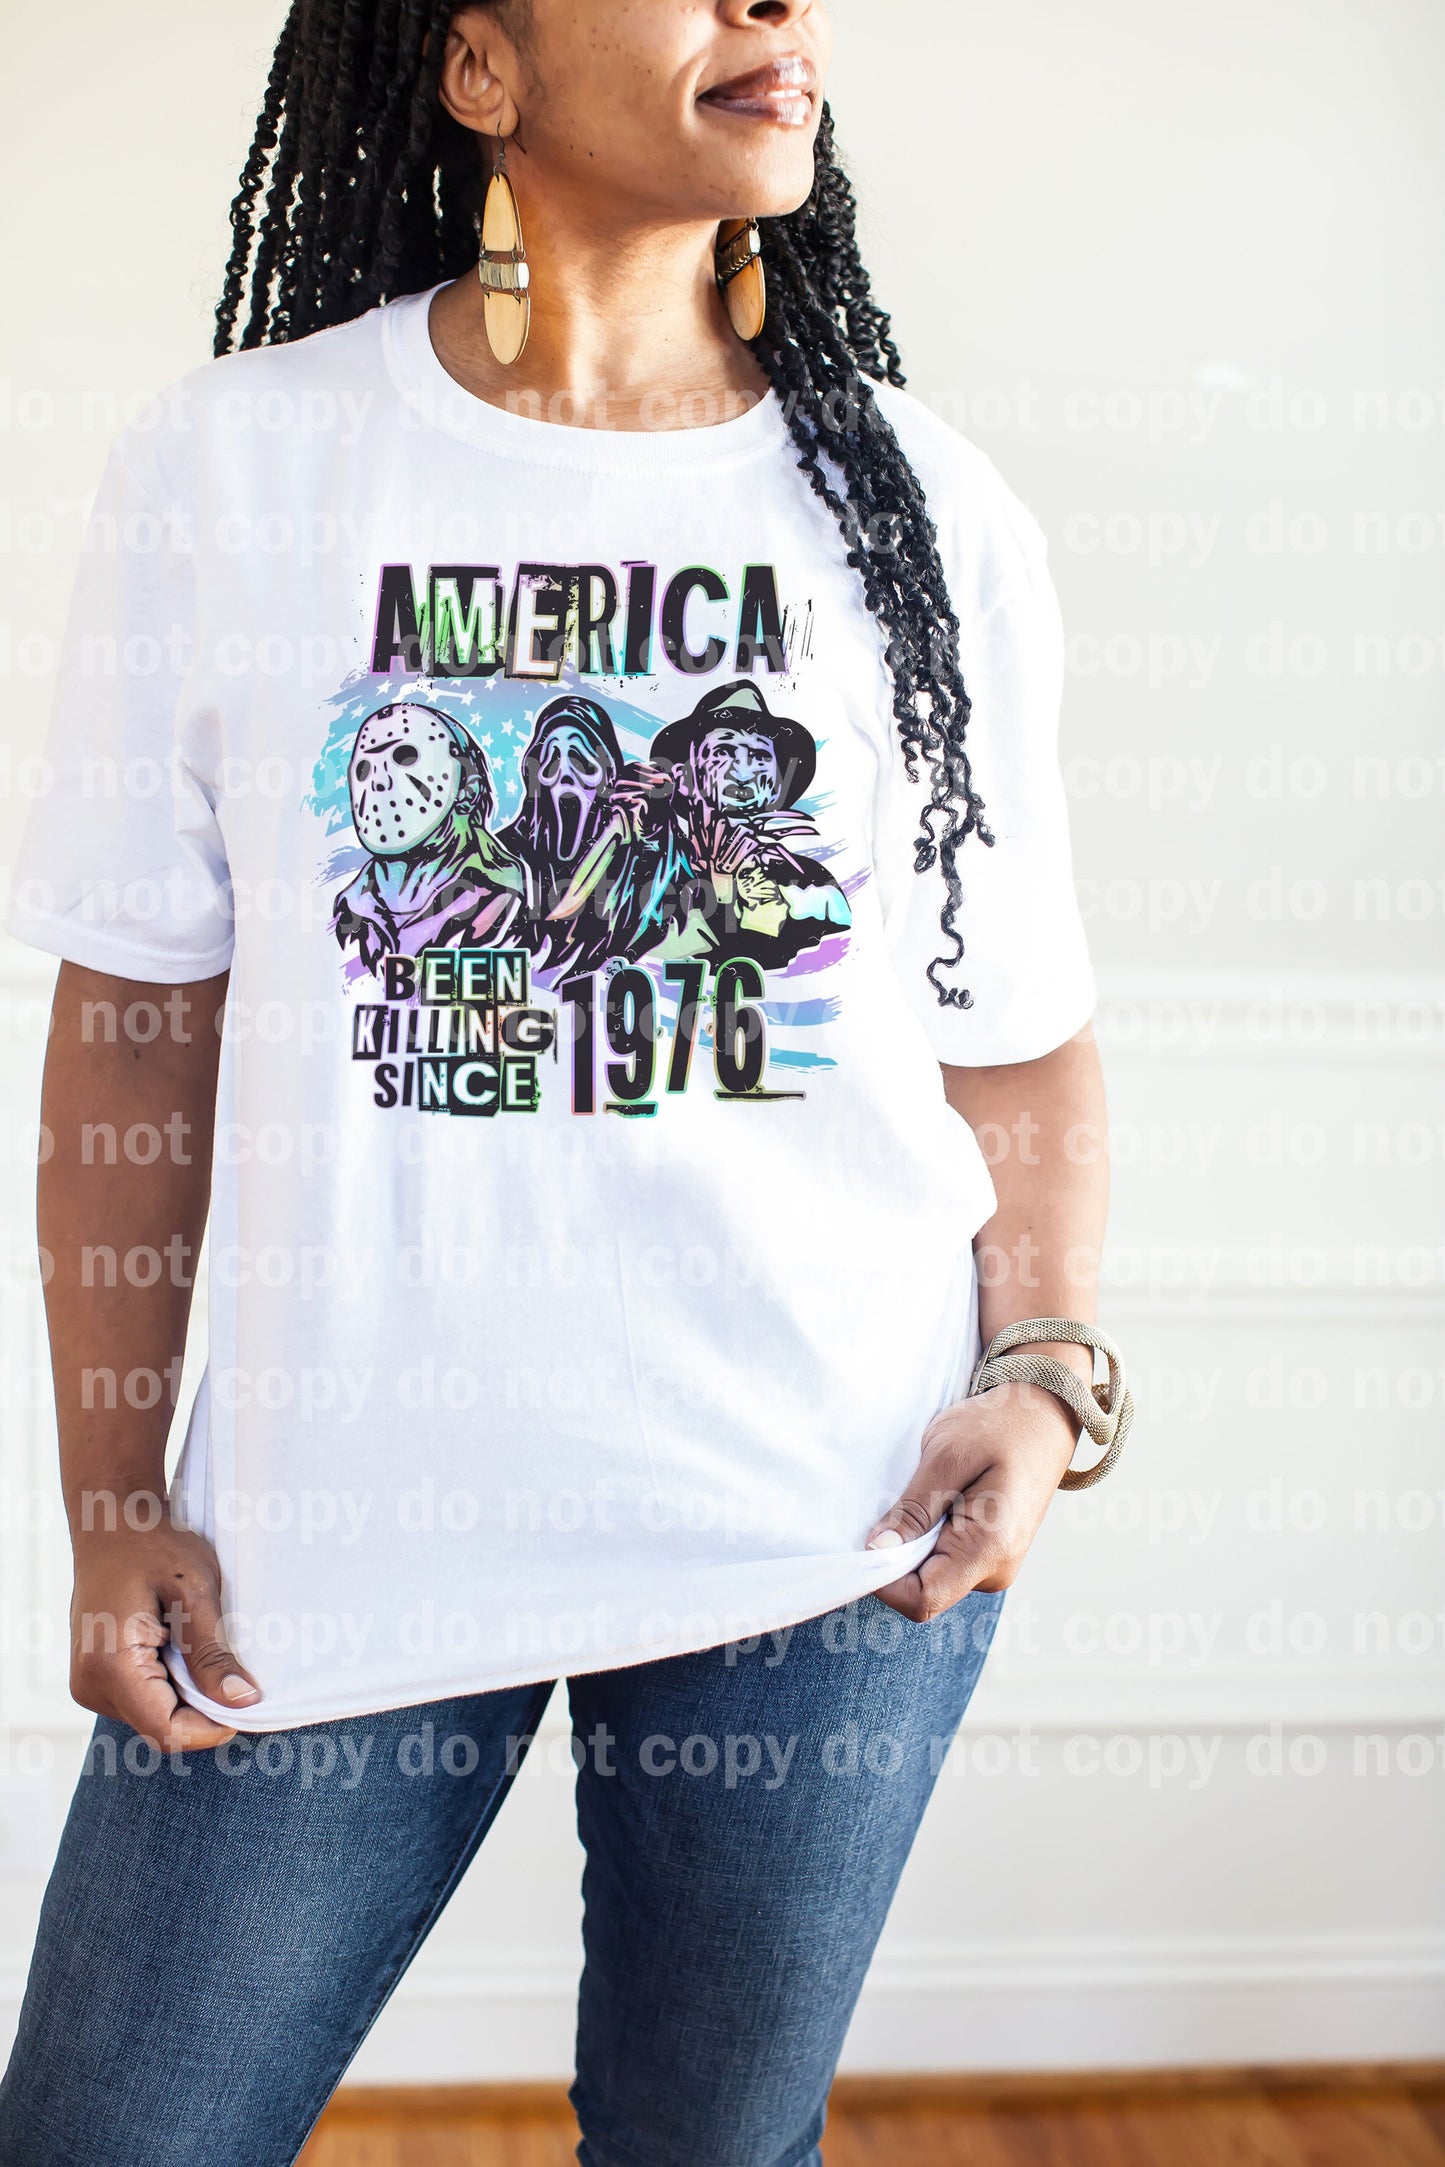 America Been Killing Since 1976 Dream Print or Sublimation Print